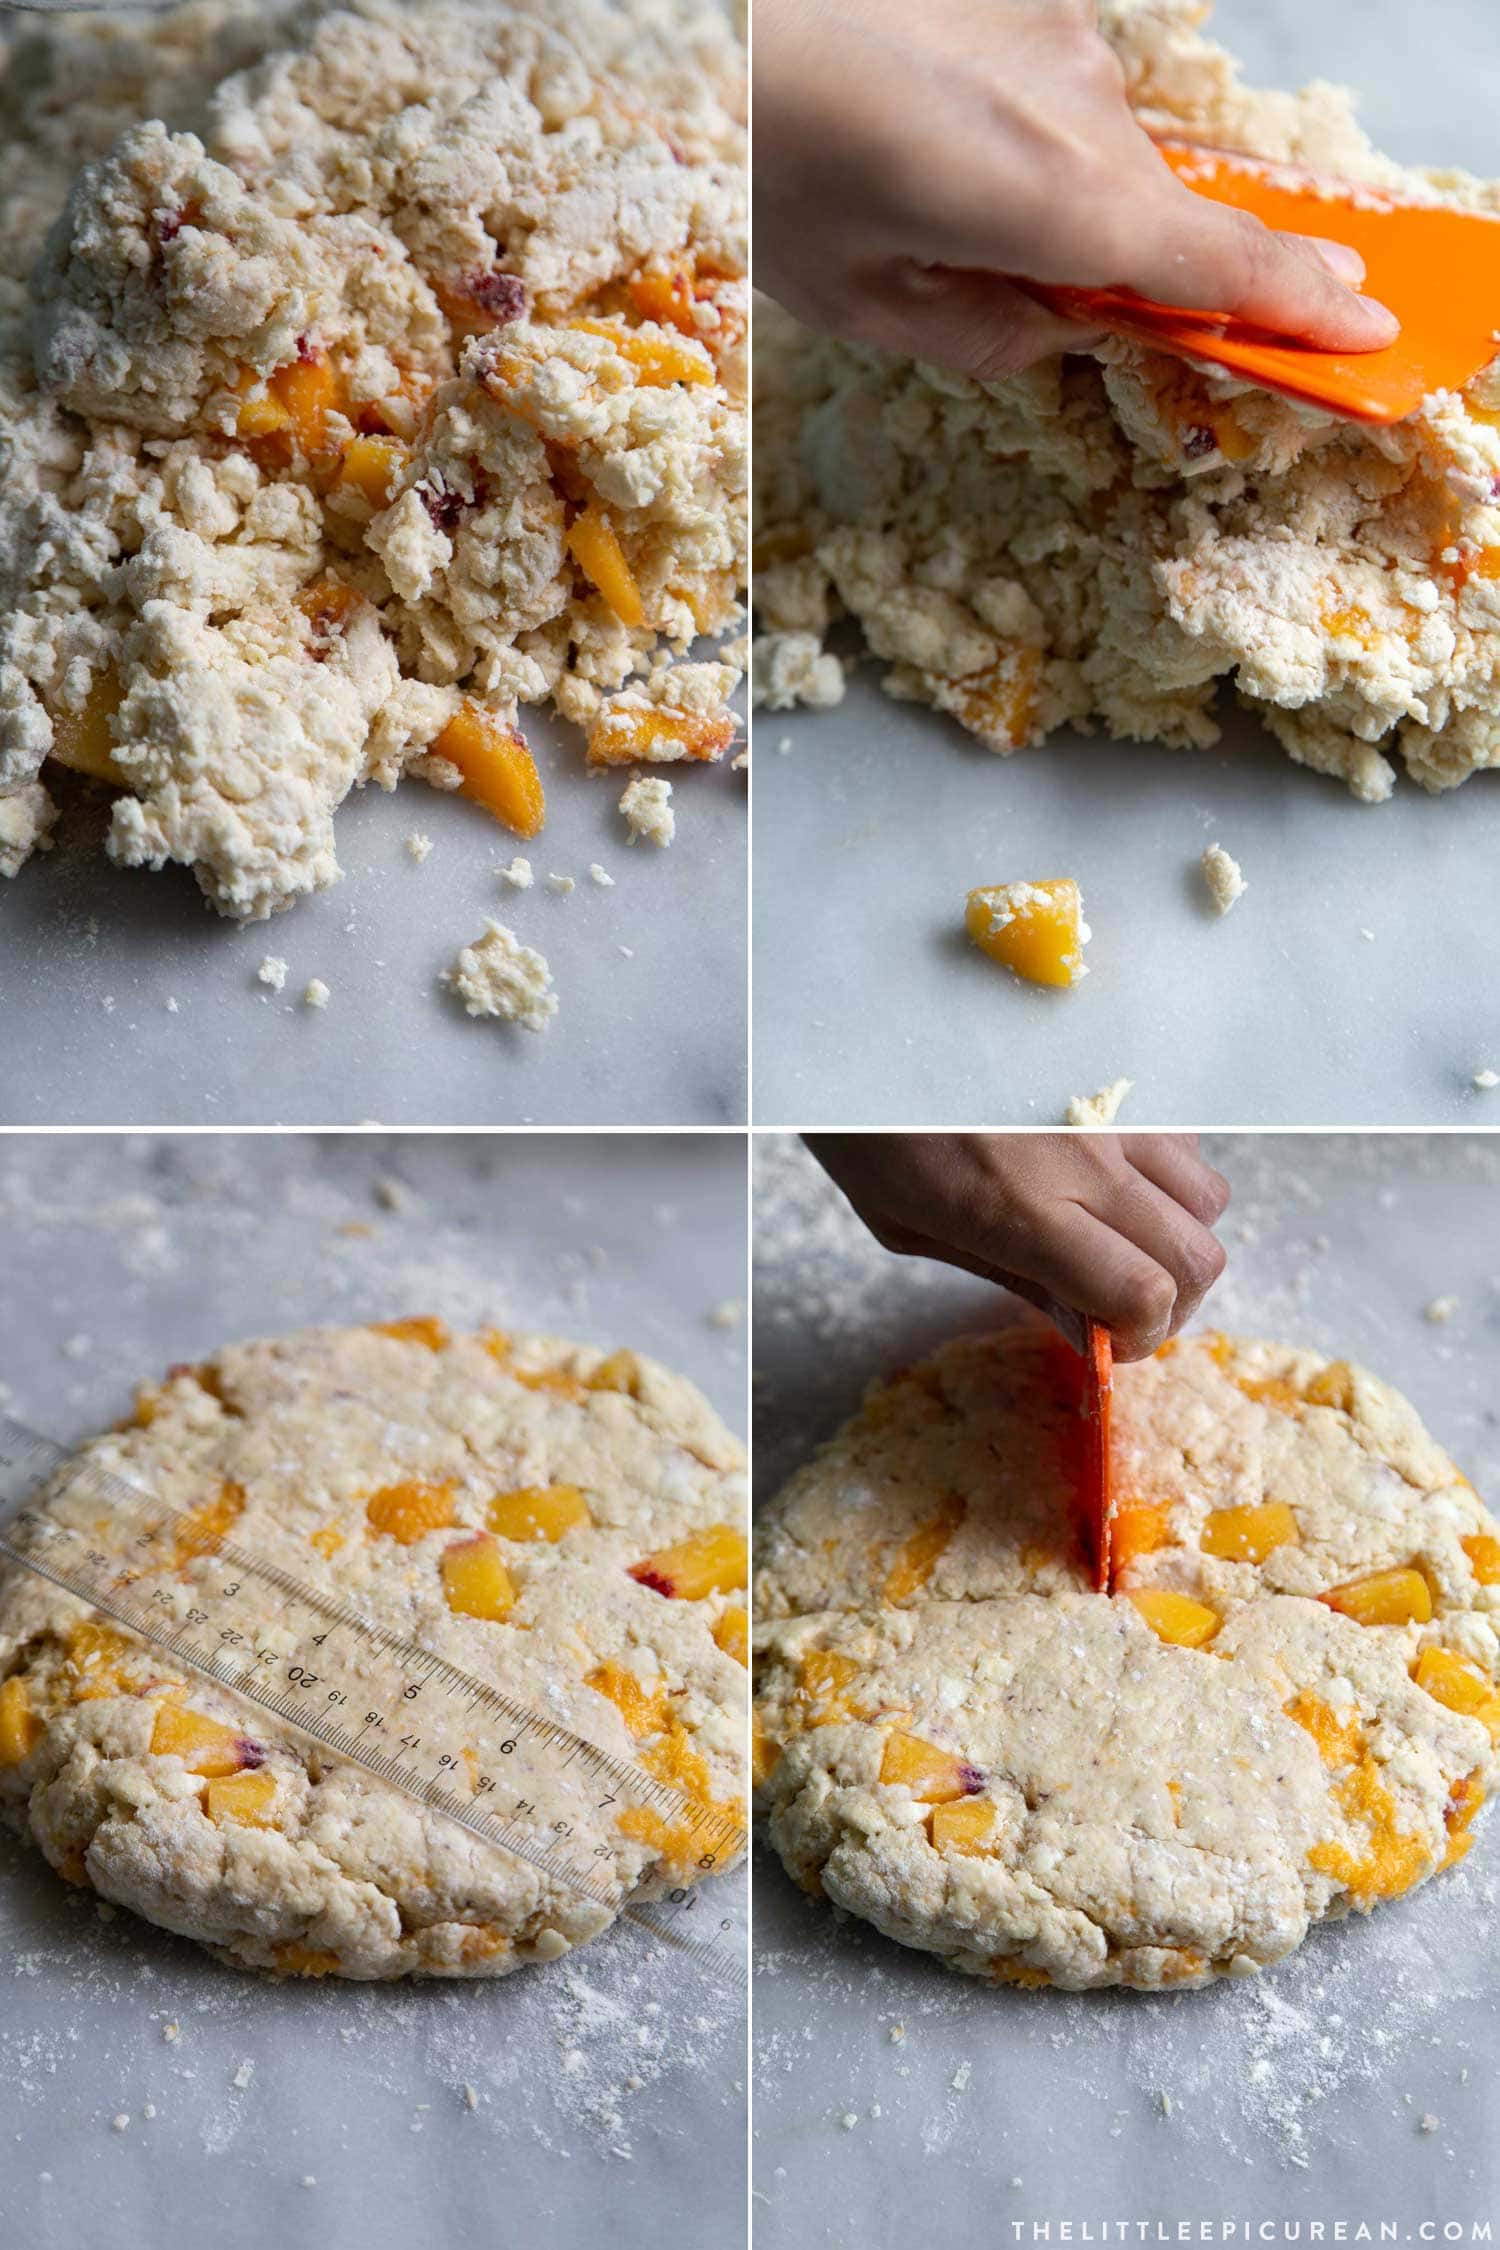 Brown Butter Peach Scones. How to knead scone dough by hand.